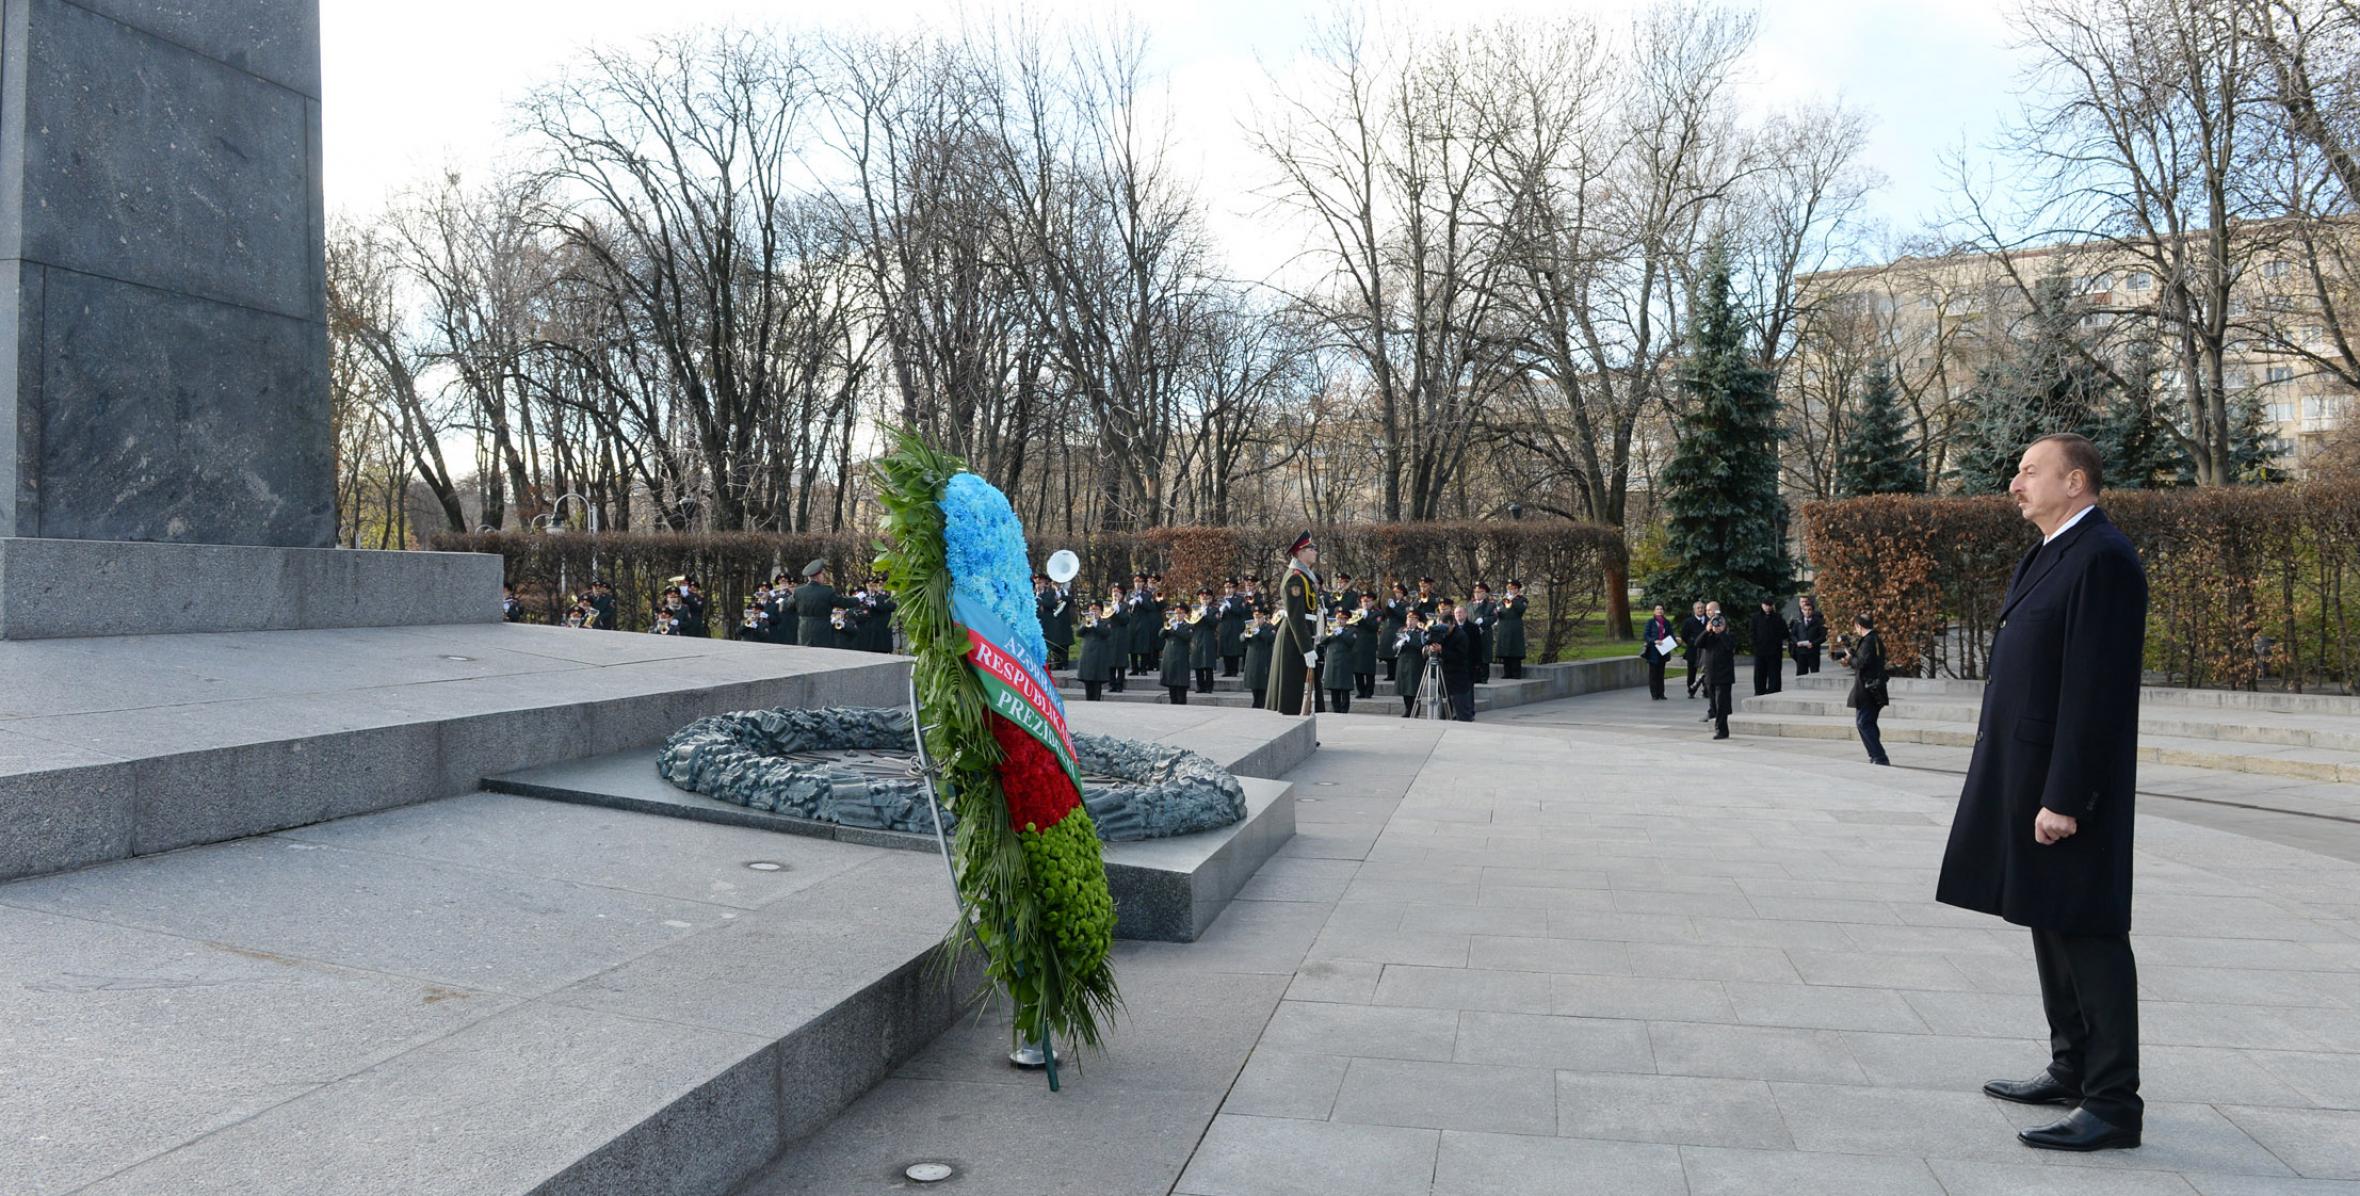 Ilham Aliyev has visited the Monument to the Unknown Soldier in Kiev